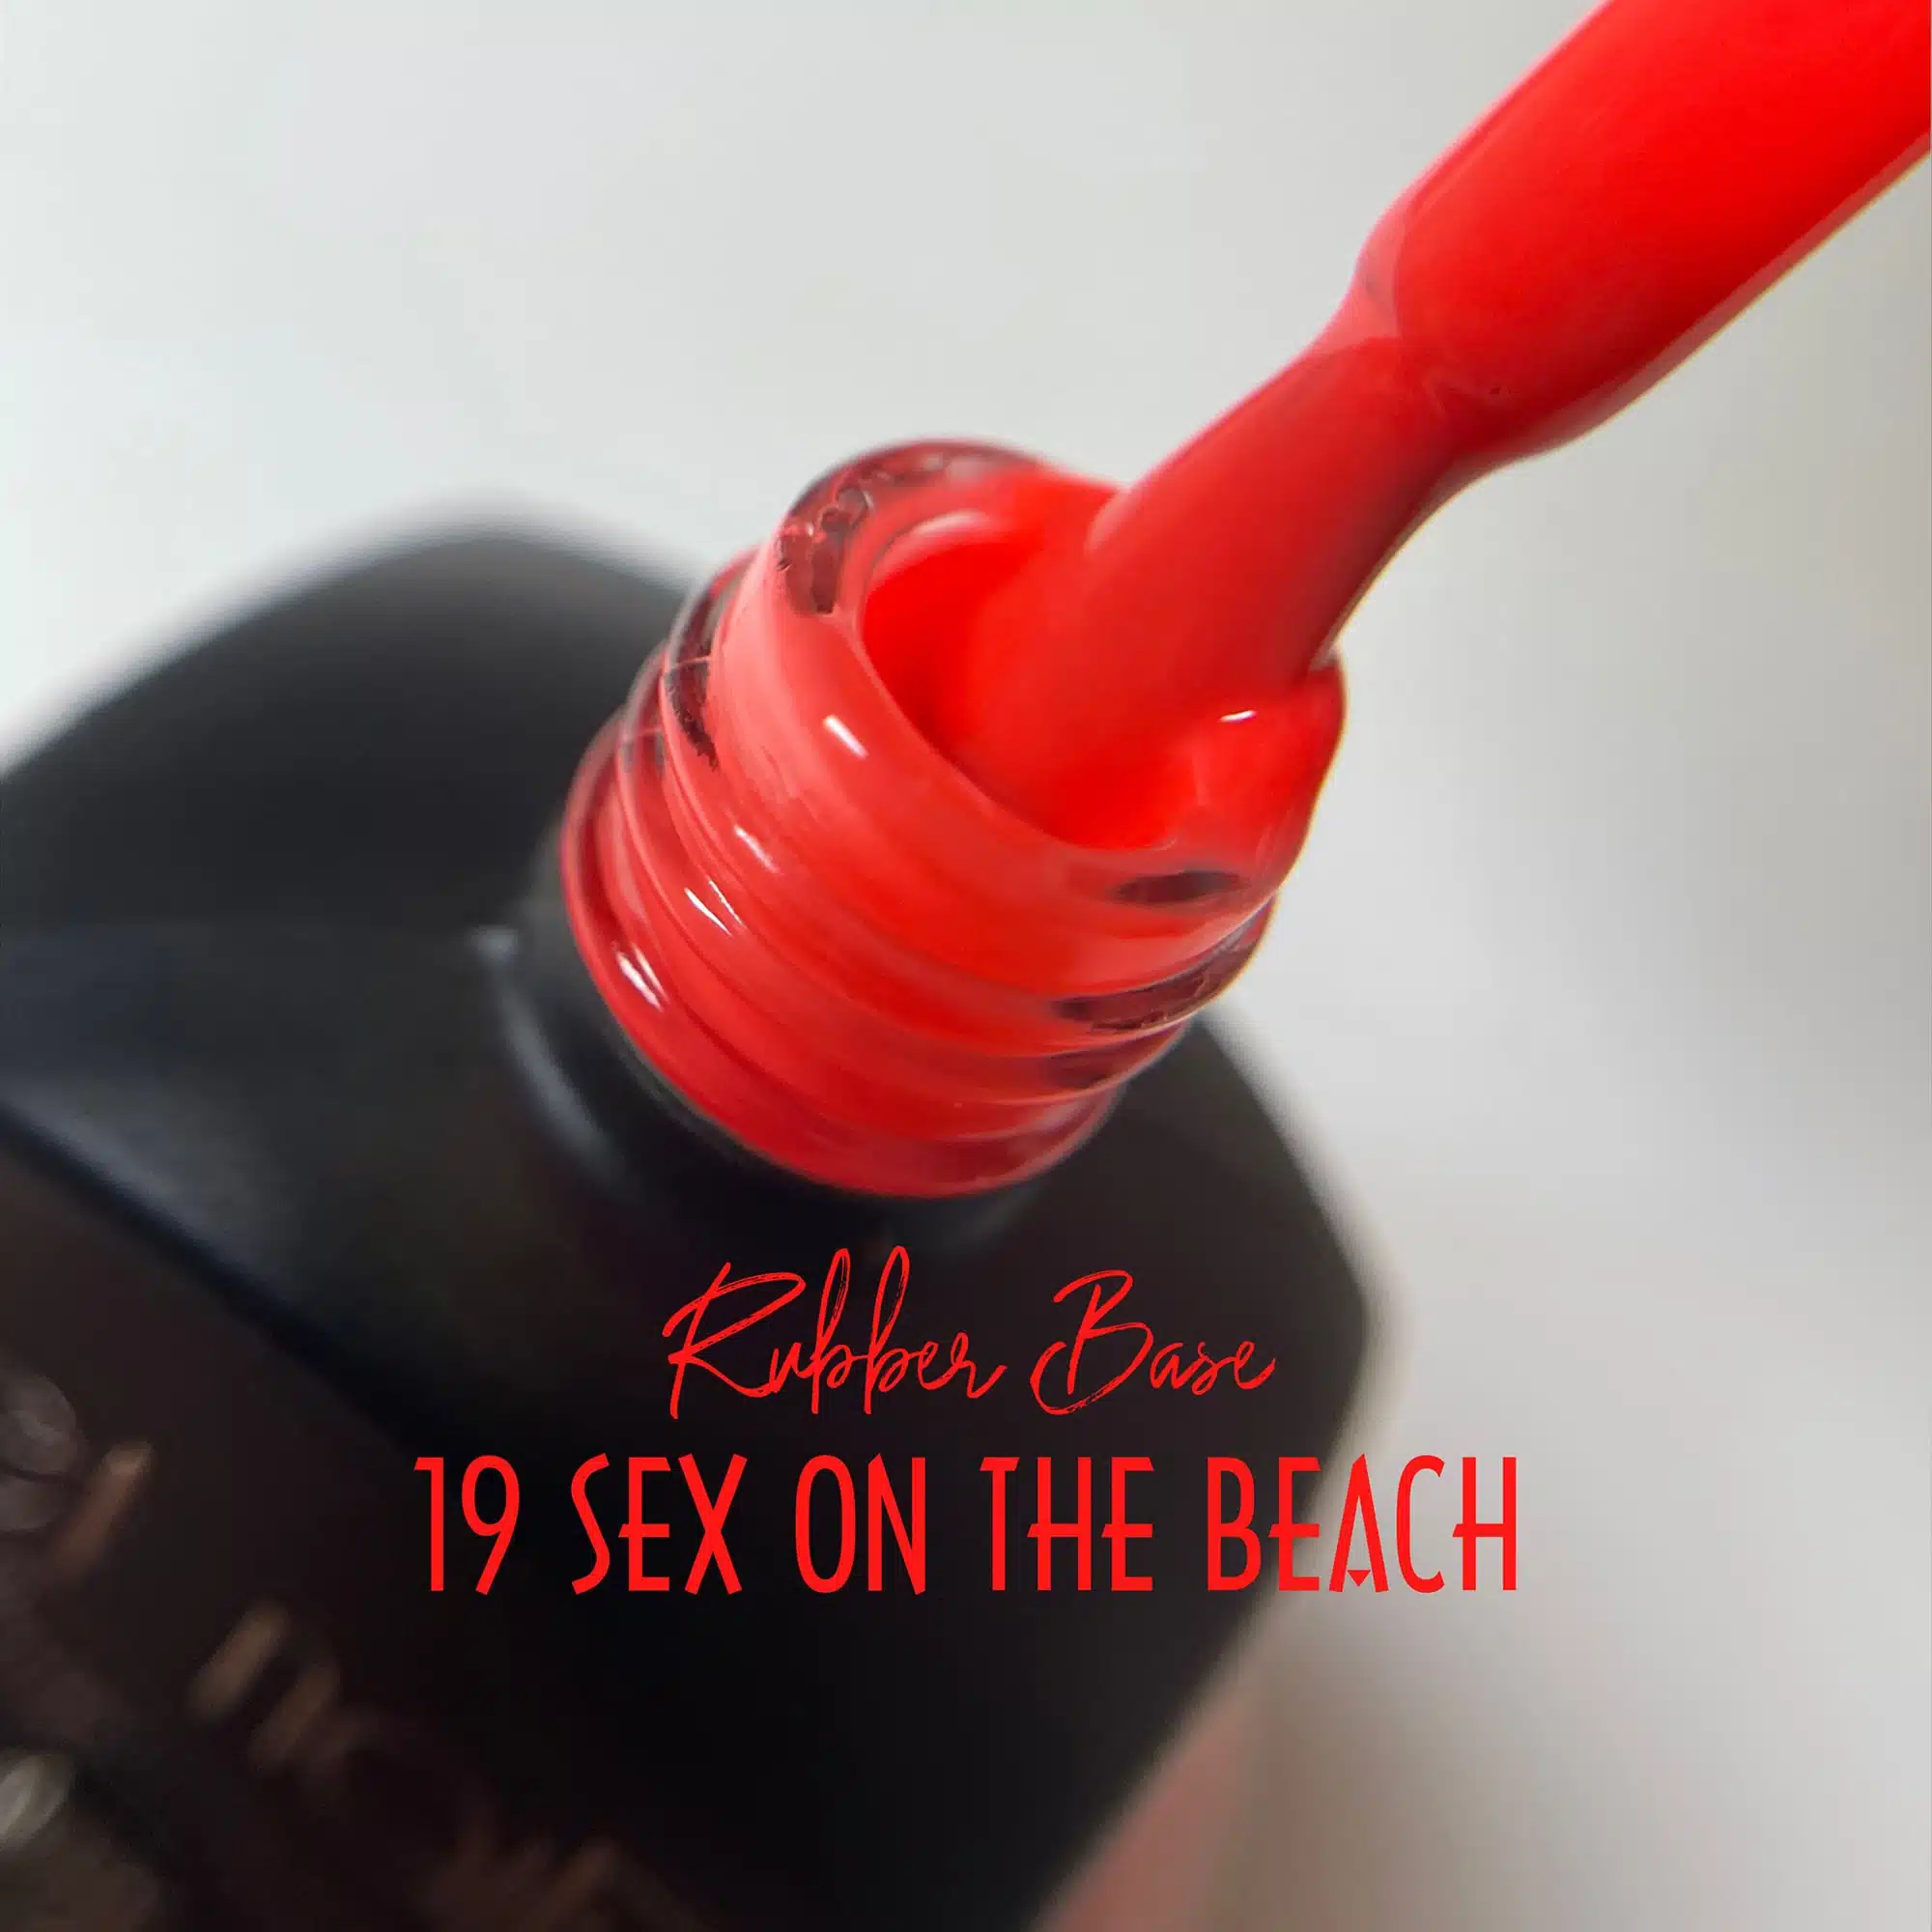 Get Nails Austria - Base in gomma GetLac 19 Sex on the Beach 15g